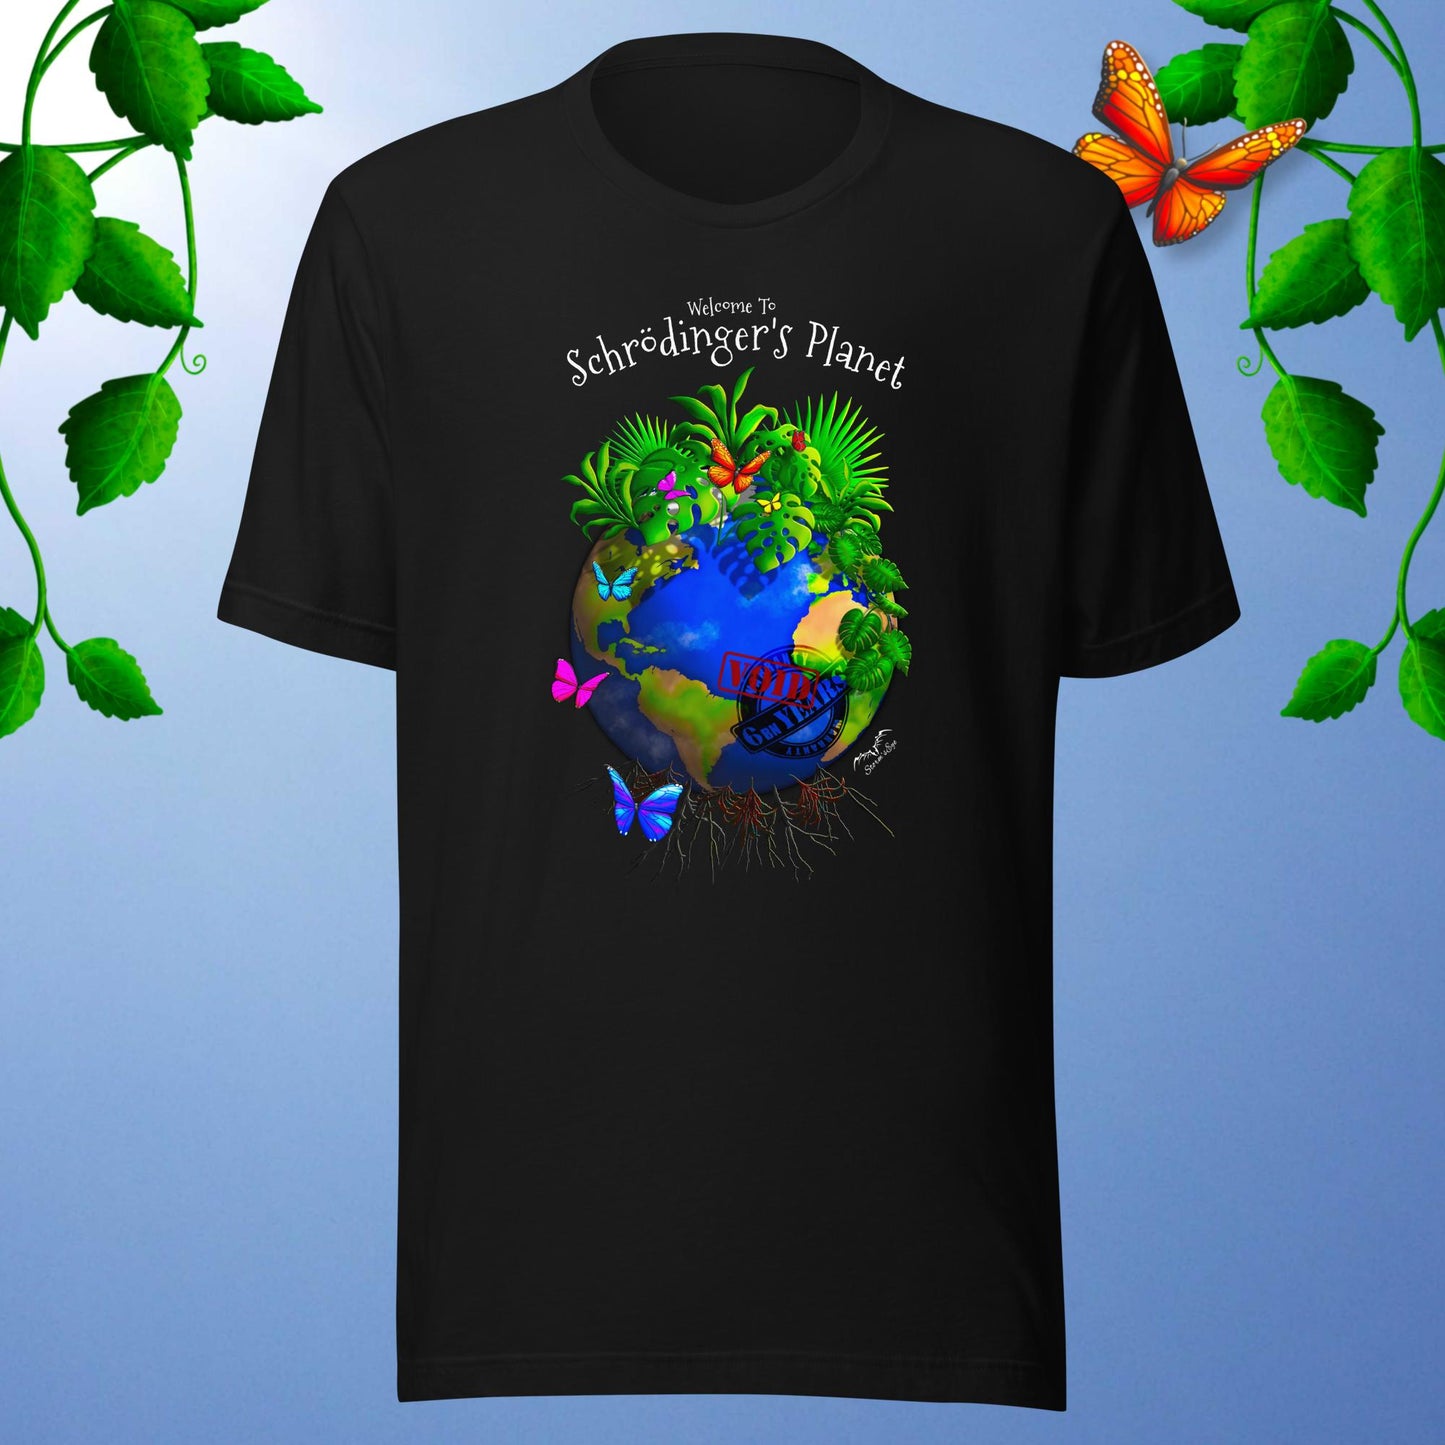 Climate Change Green Planet T-shirt black by stormseye design